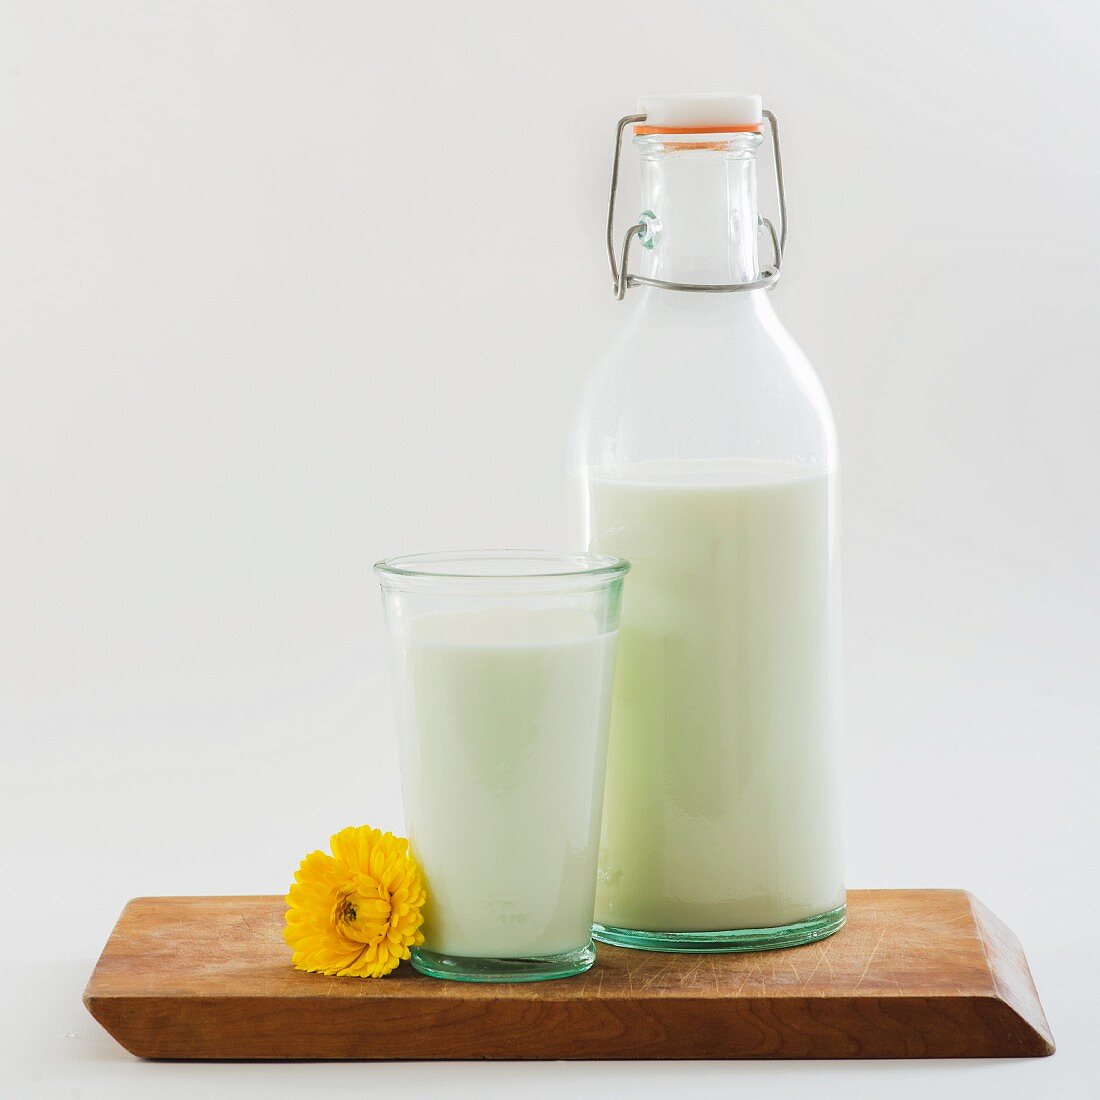 Organic milk in a bottle and in a glass